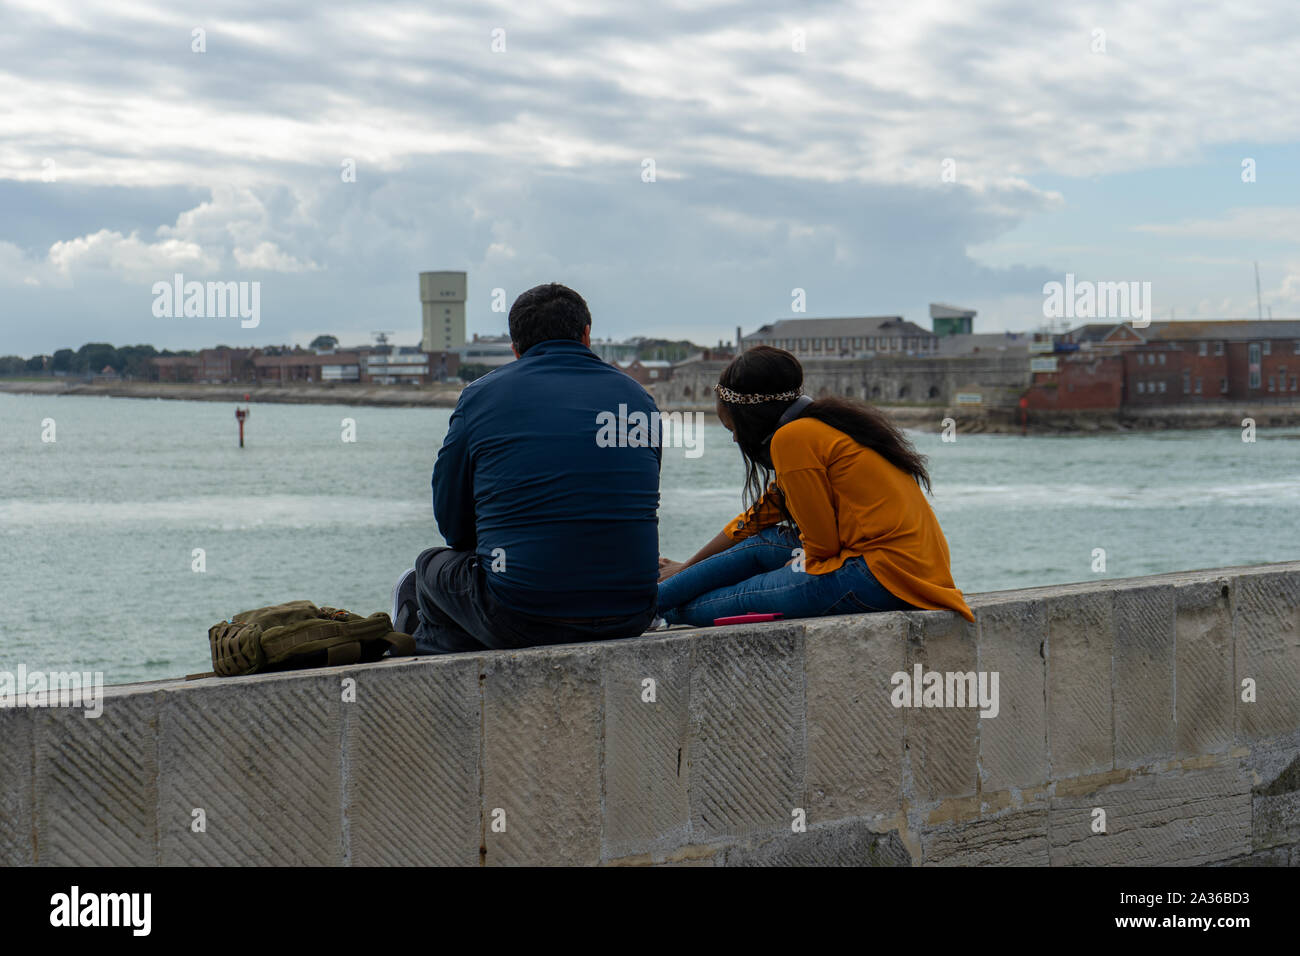 A multicultural couple sitting on a wall at the seaside chatting while looking out to sea at the view Stock Photo